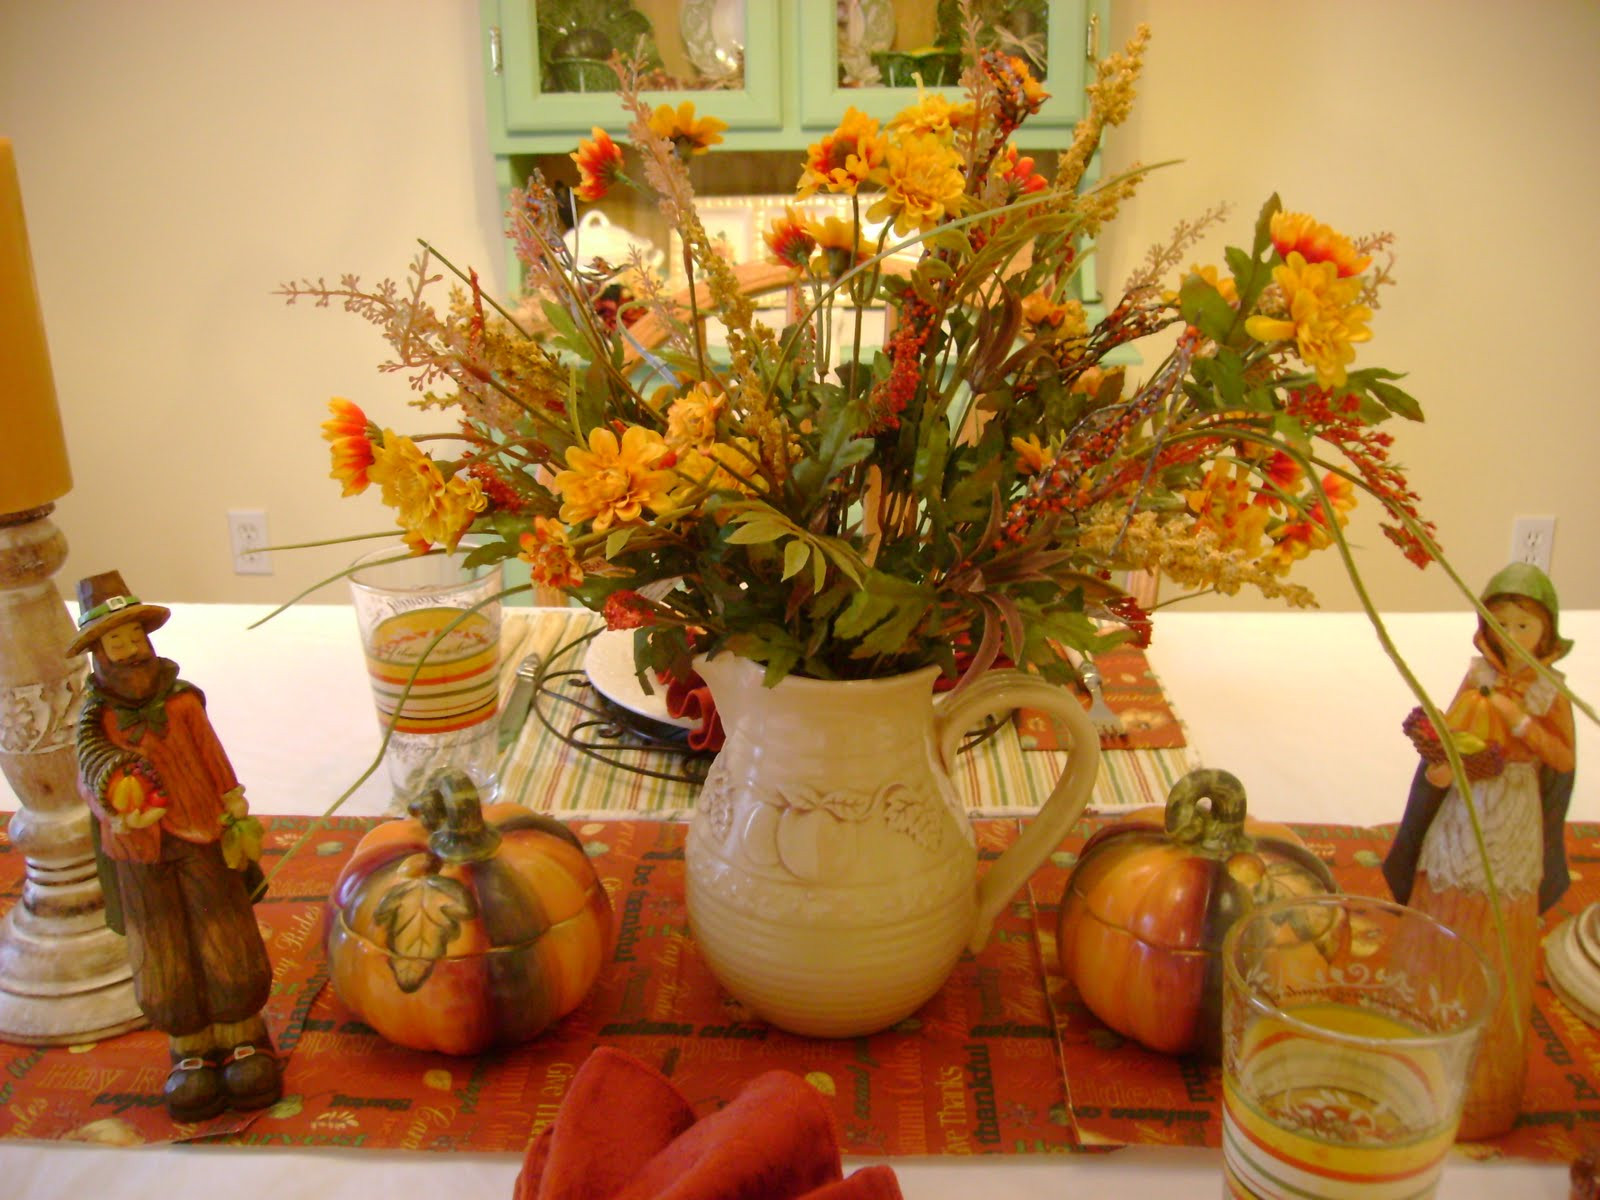 Thanksgiving Table Centerpieces
 The Sunny Side of the Sun Porch My Thanksgiving Table